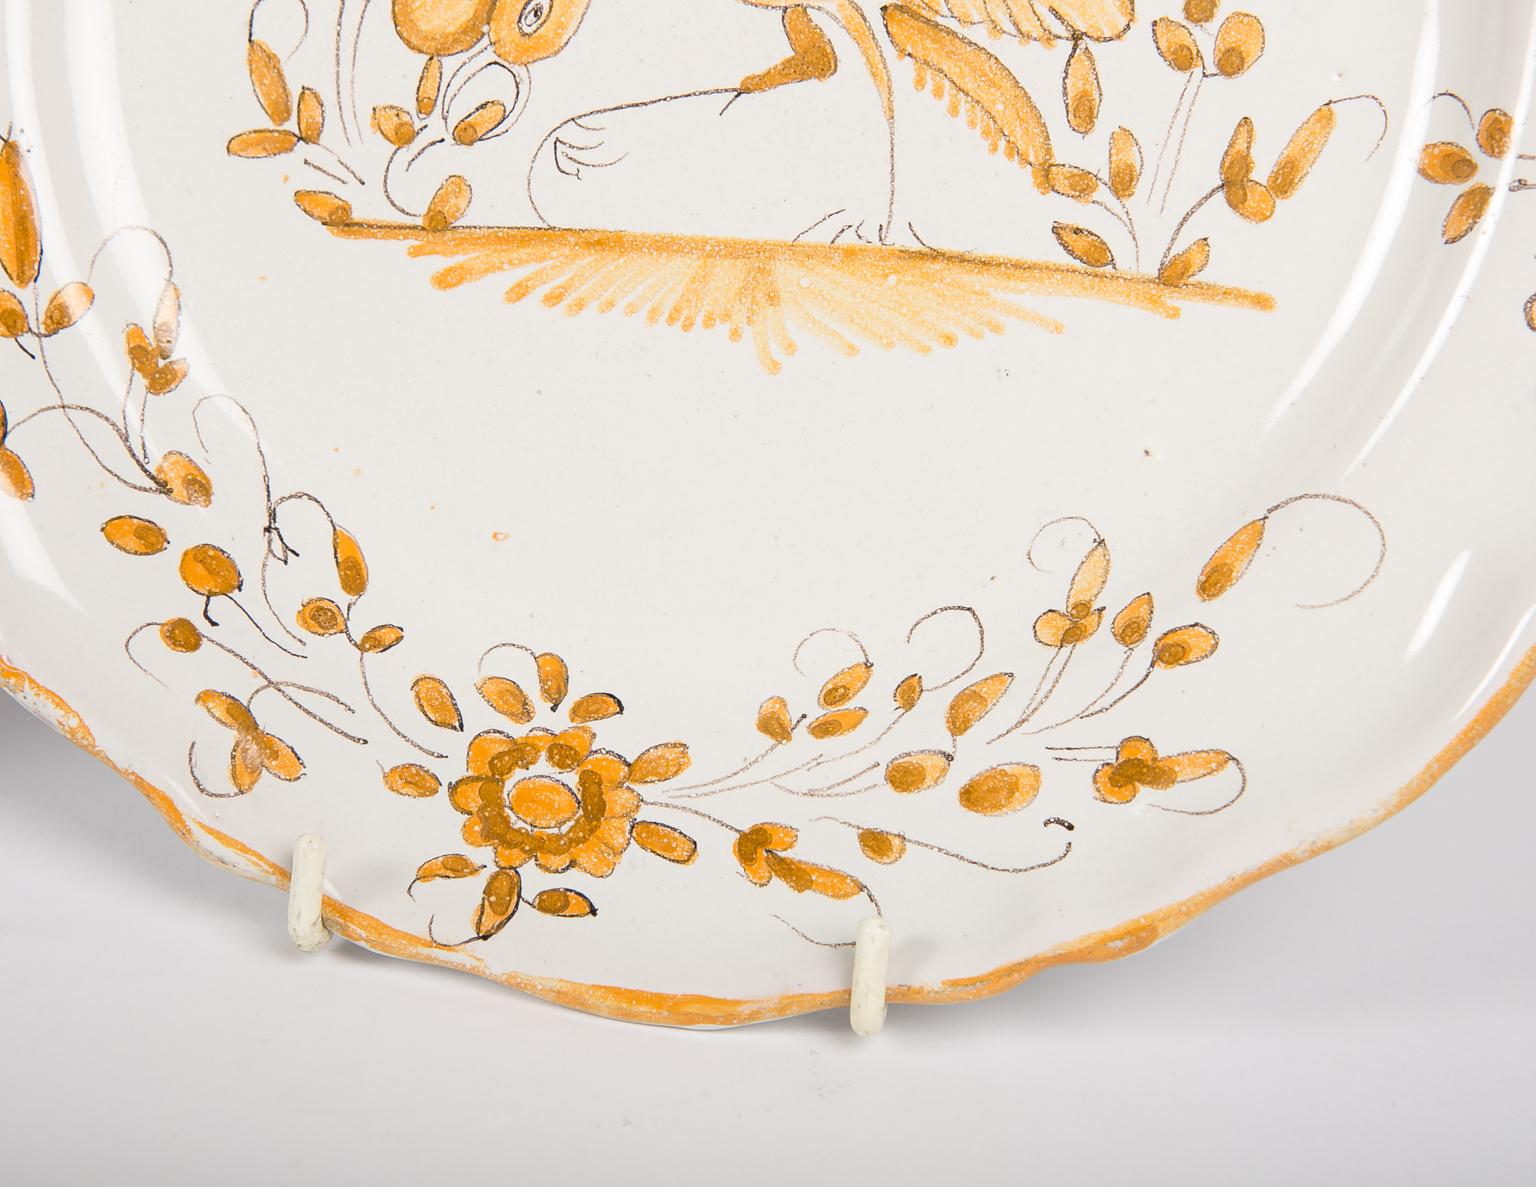 Chinoiserie French Faience Dishes or Plates Made circa 1780 For Sale